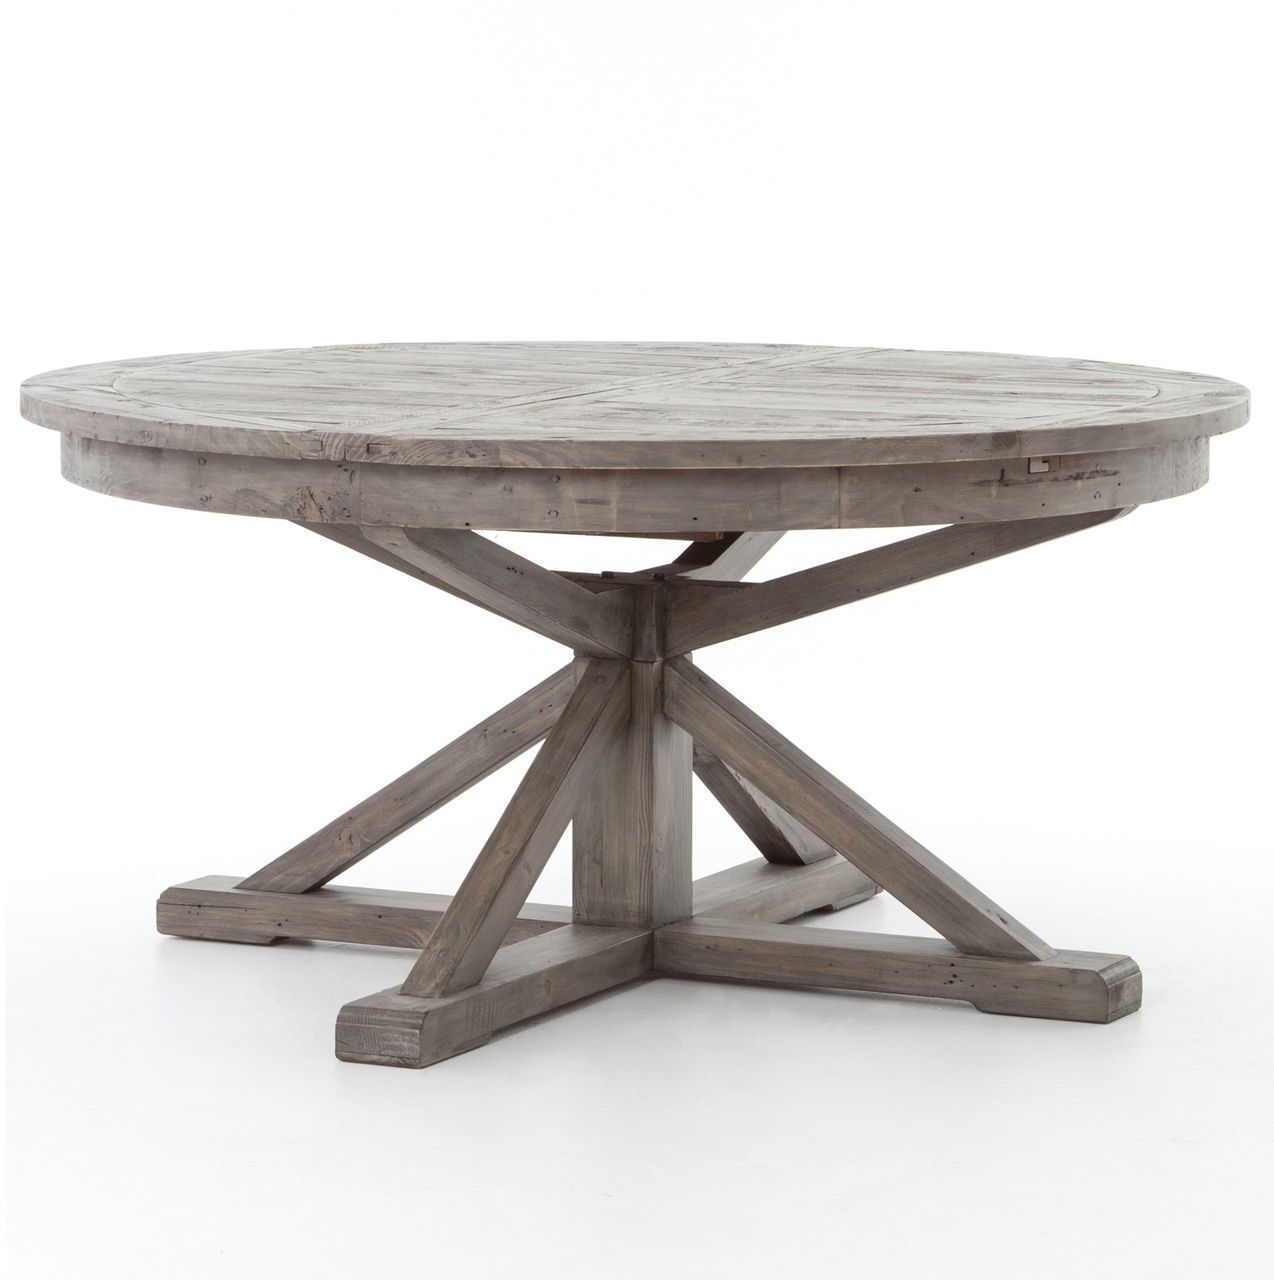 Cintra Reclaimed Wood Extending Round Dining Table 63"  Gray Inside Recent Gray Wash Benchwright Pedestal Extending Dining Tables (View 2 of 25)